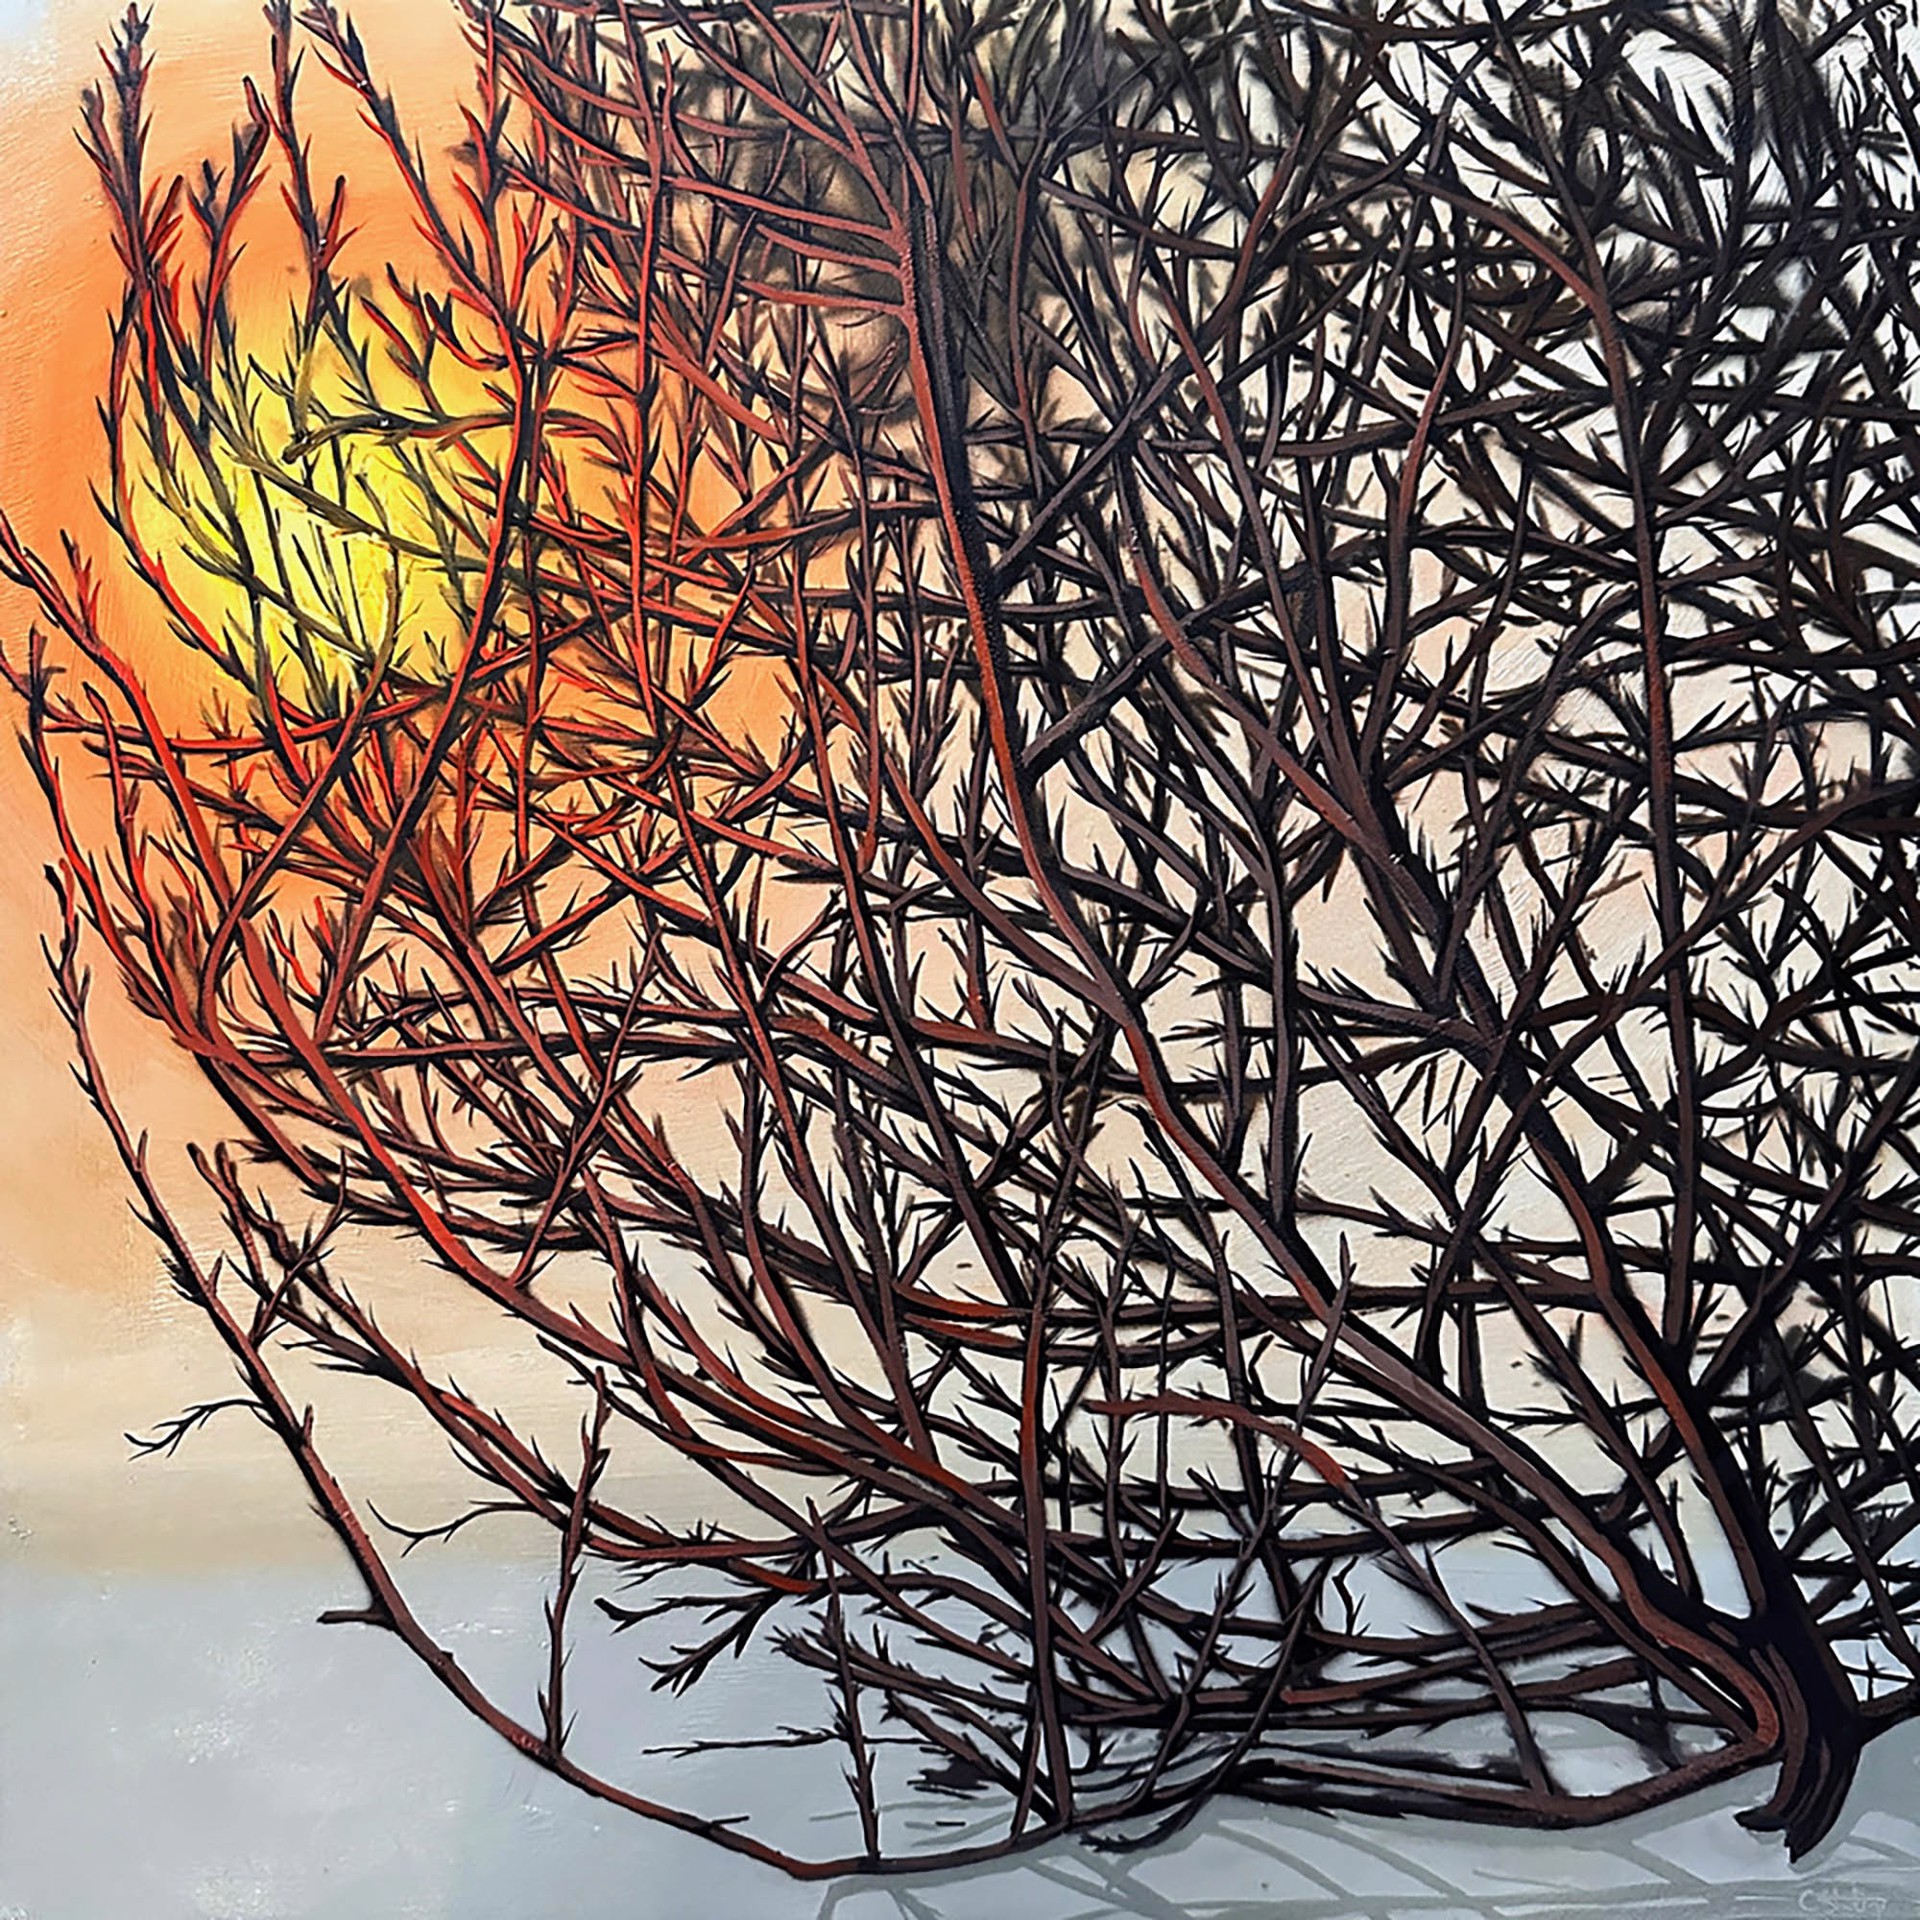 Original Painting by Christy Stallop Featuring a Tumbleweed Still During Dusk